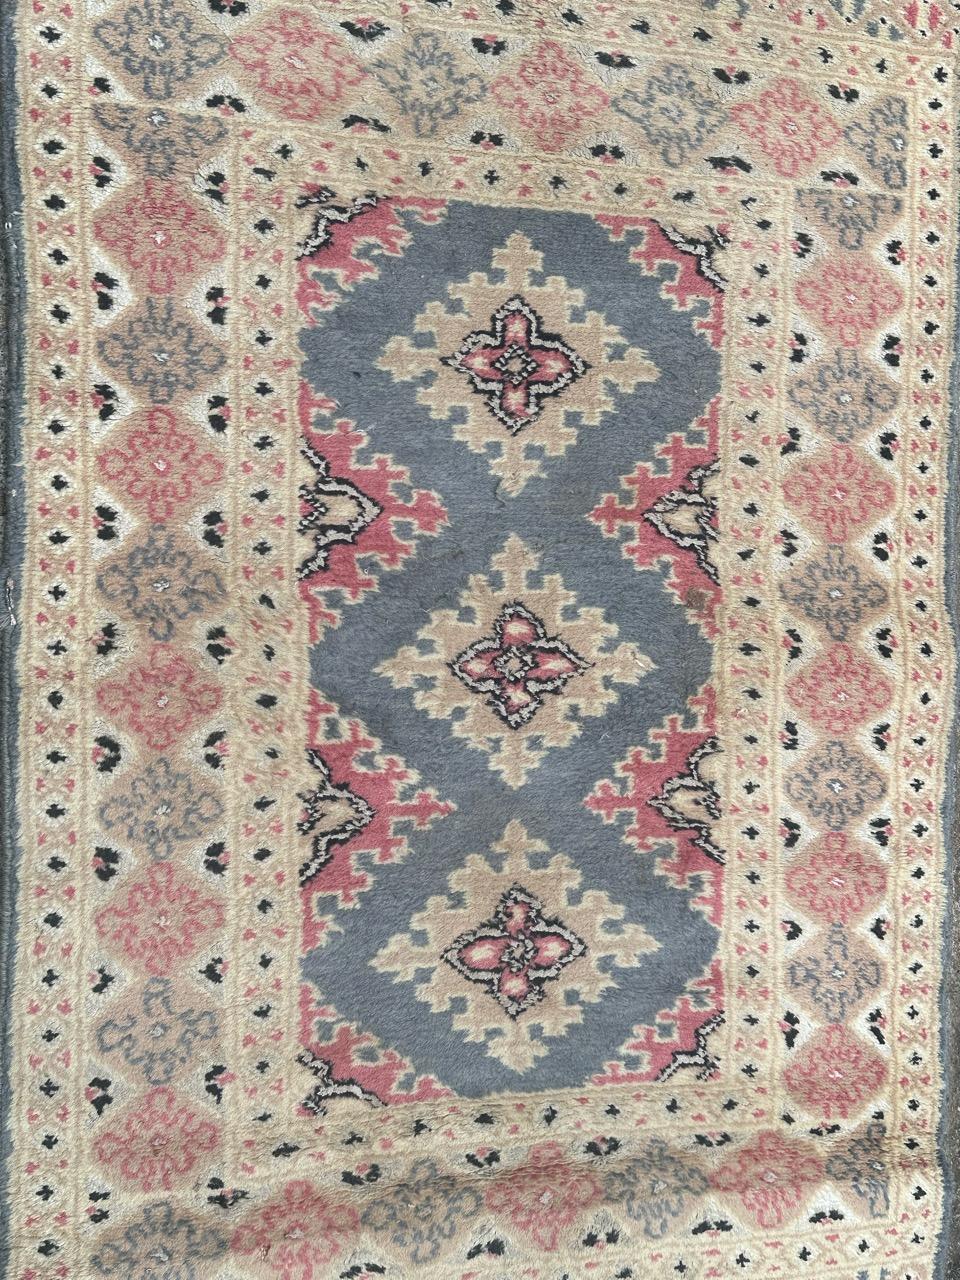 Pretty small vintage Pakistani rug with nice geometrical design in style of Turkmen rugs, and beautiful colours with pink, sky blue, beige, white and black, entirely and finely hand knotted with wool on cotton foundation.

✨✨✨
